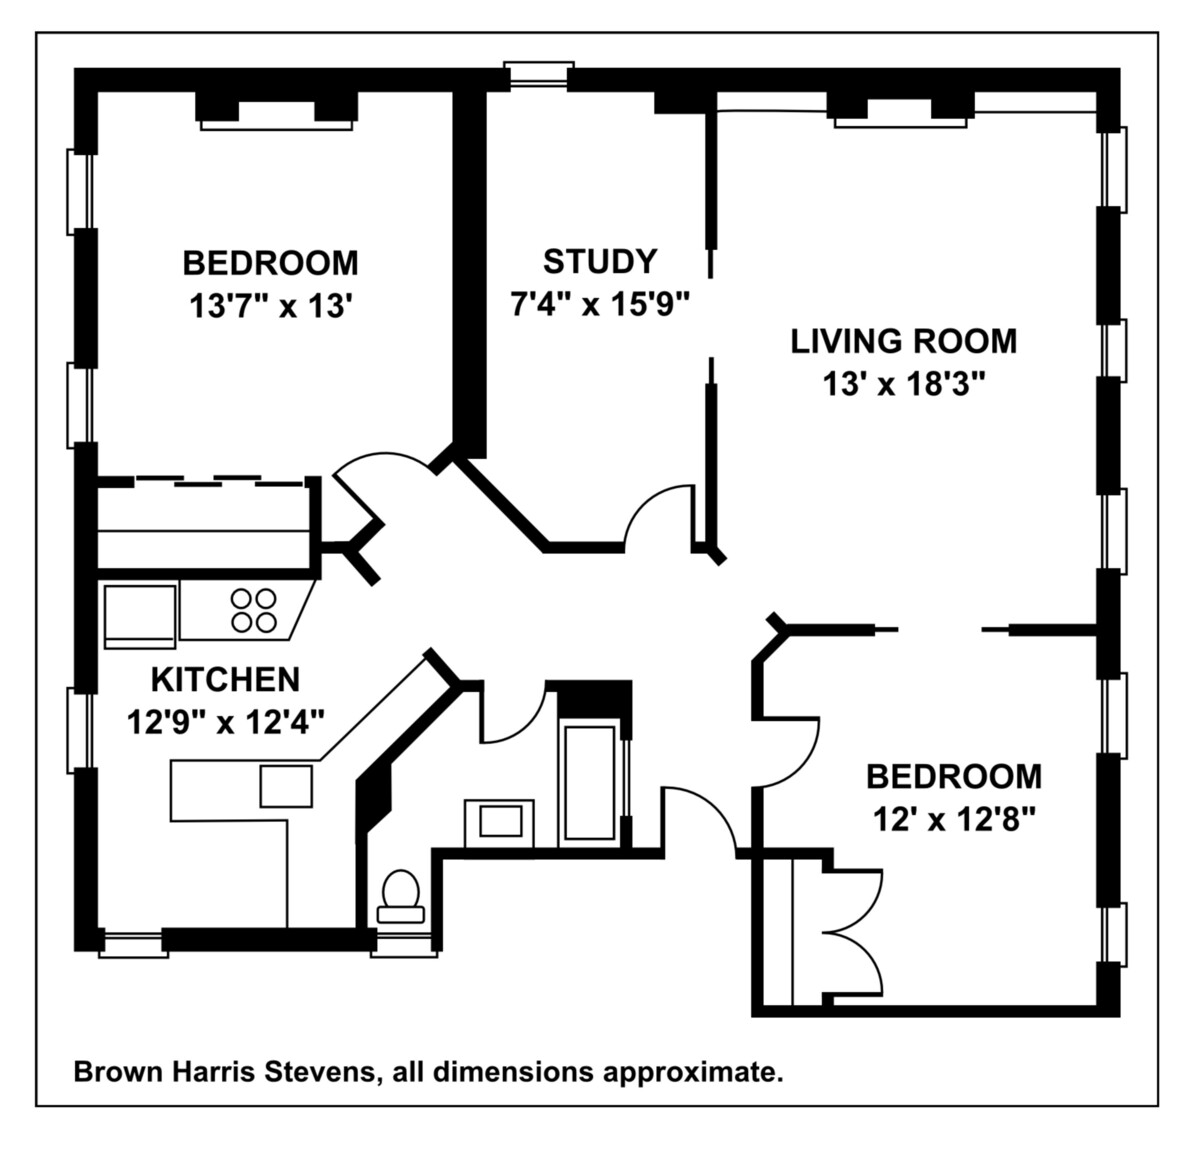 floor plan with two bedrooms and a study